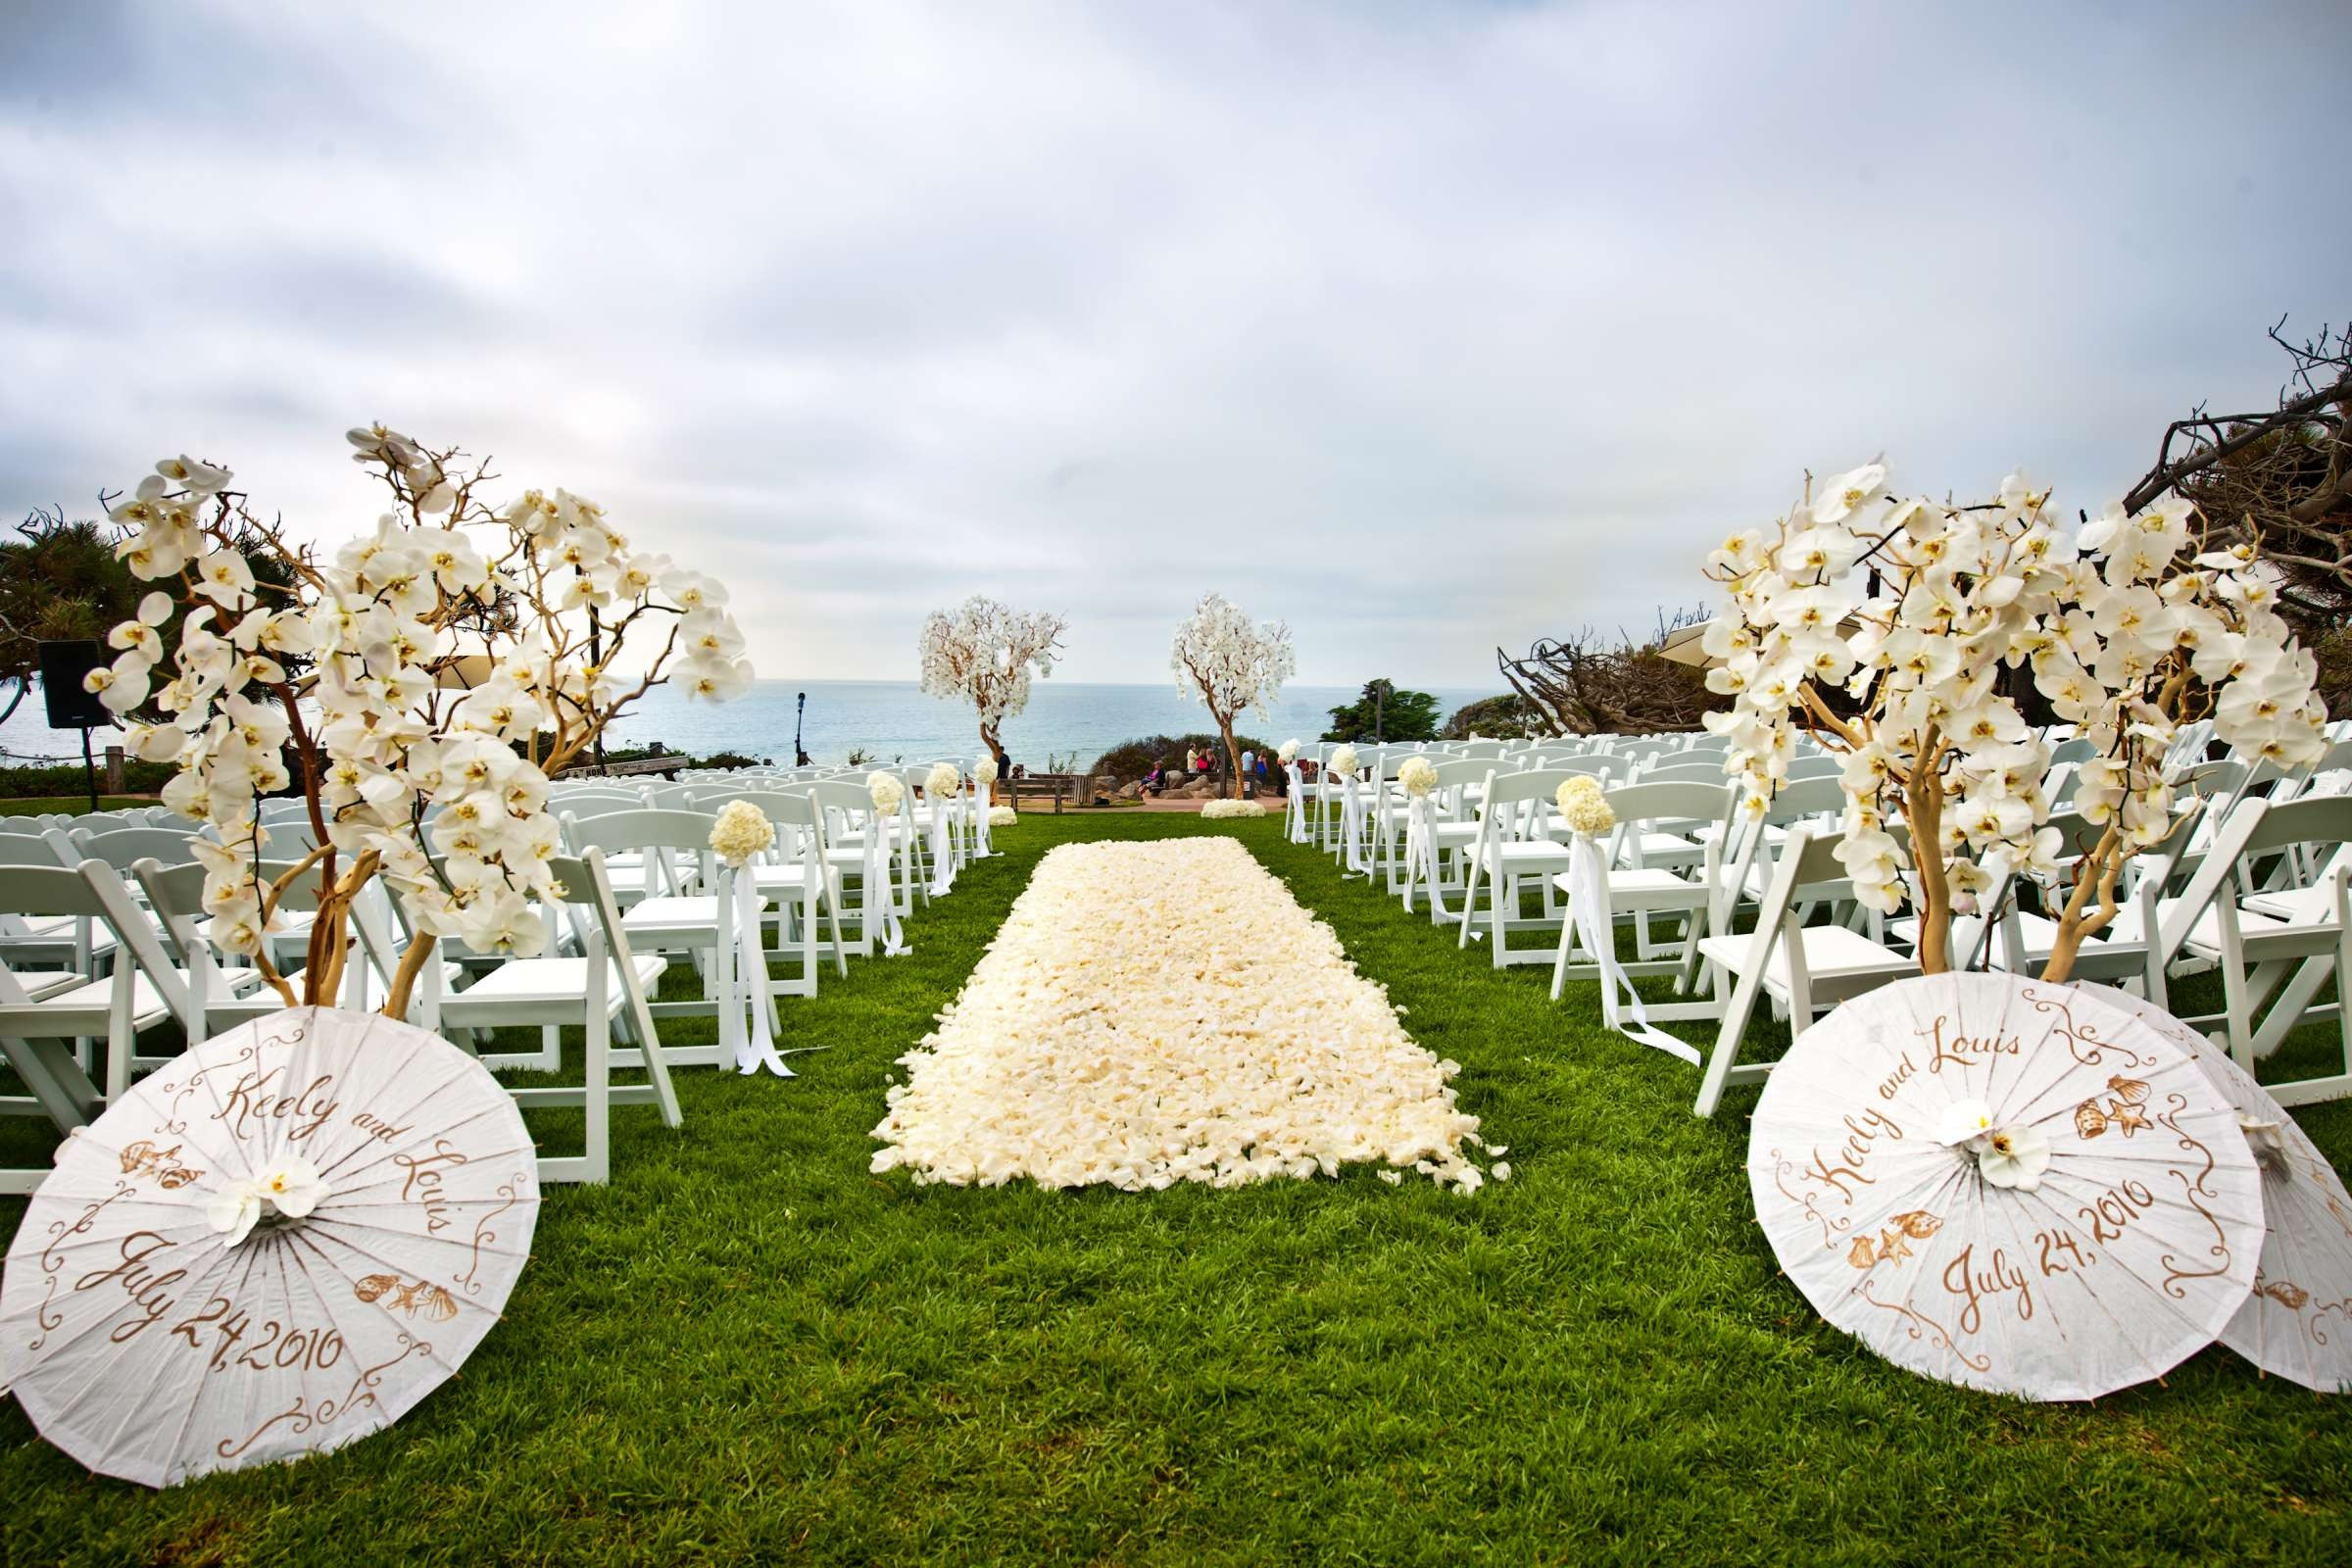 20 Trendy Outside Flower Vases 2024 free download outside flower vases of outside wedding decorations ideas new h vases ideas for floral pertaining to outside wedding decorations ideas new white wedding parasols wedding decor outside weddin